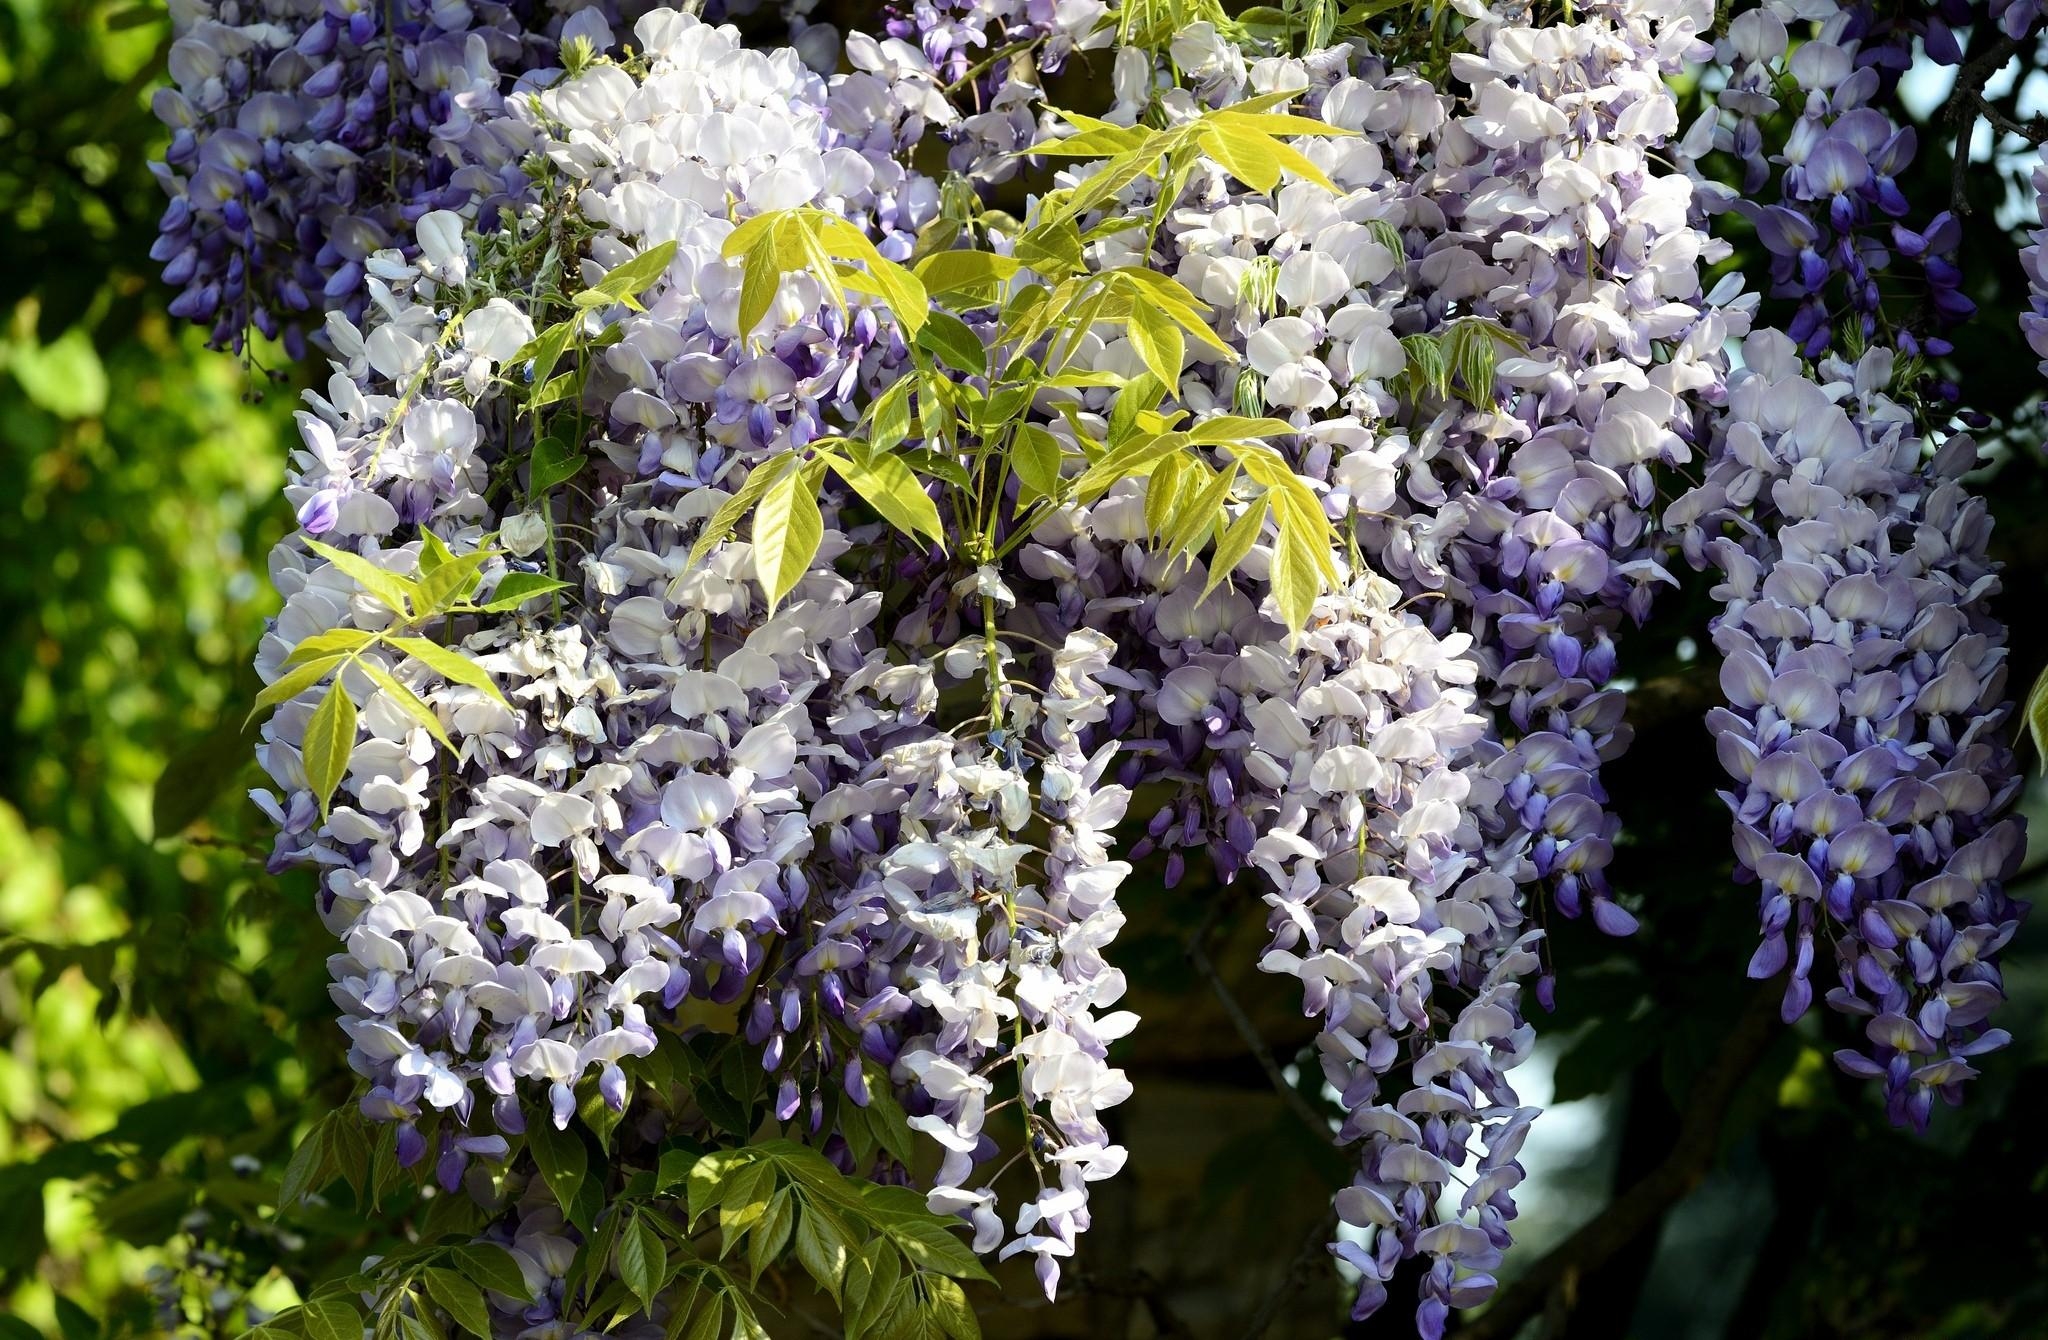 Cool Backgrounds leaves, branch, wisteria, bunches Sunny